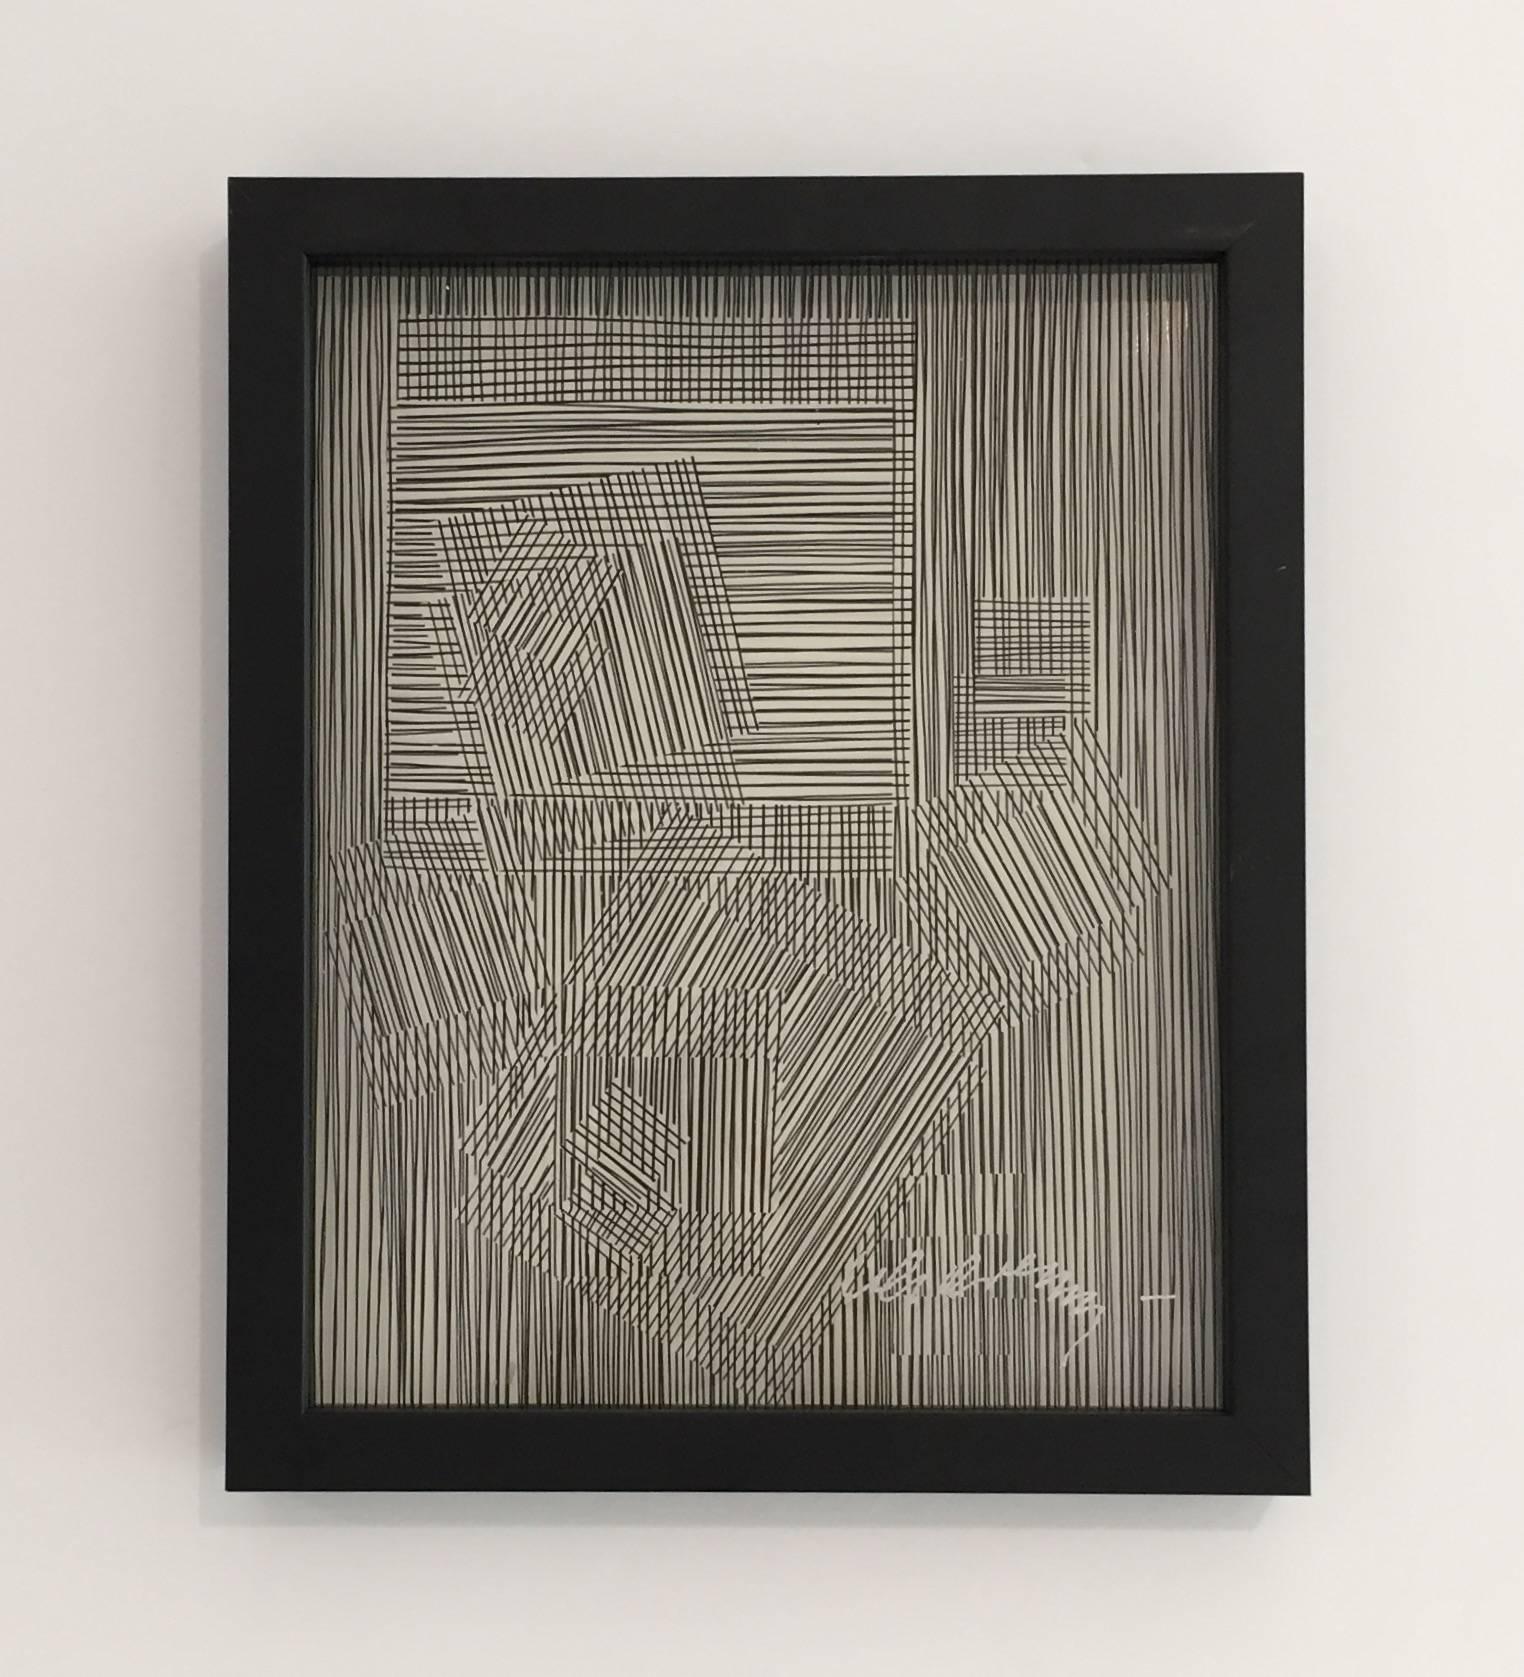 Abstract Print Victor Vasarely - Cinetique (cinetique)